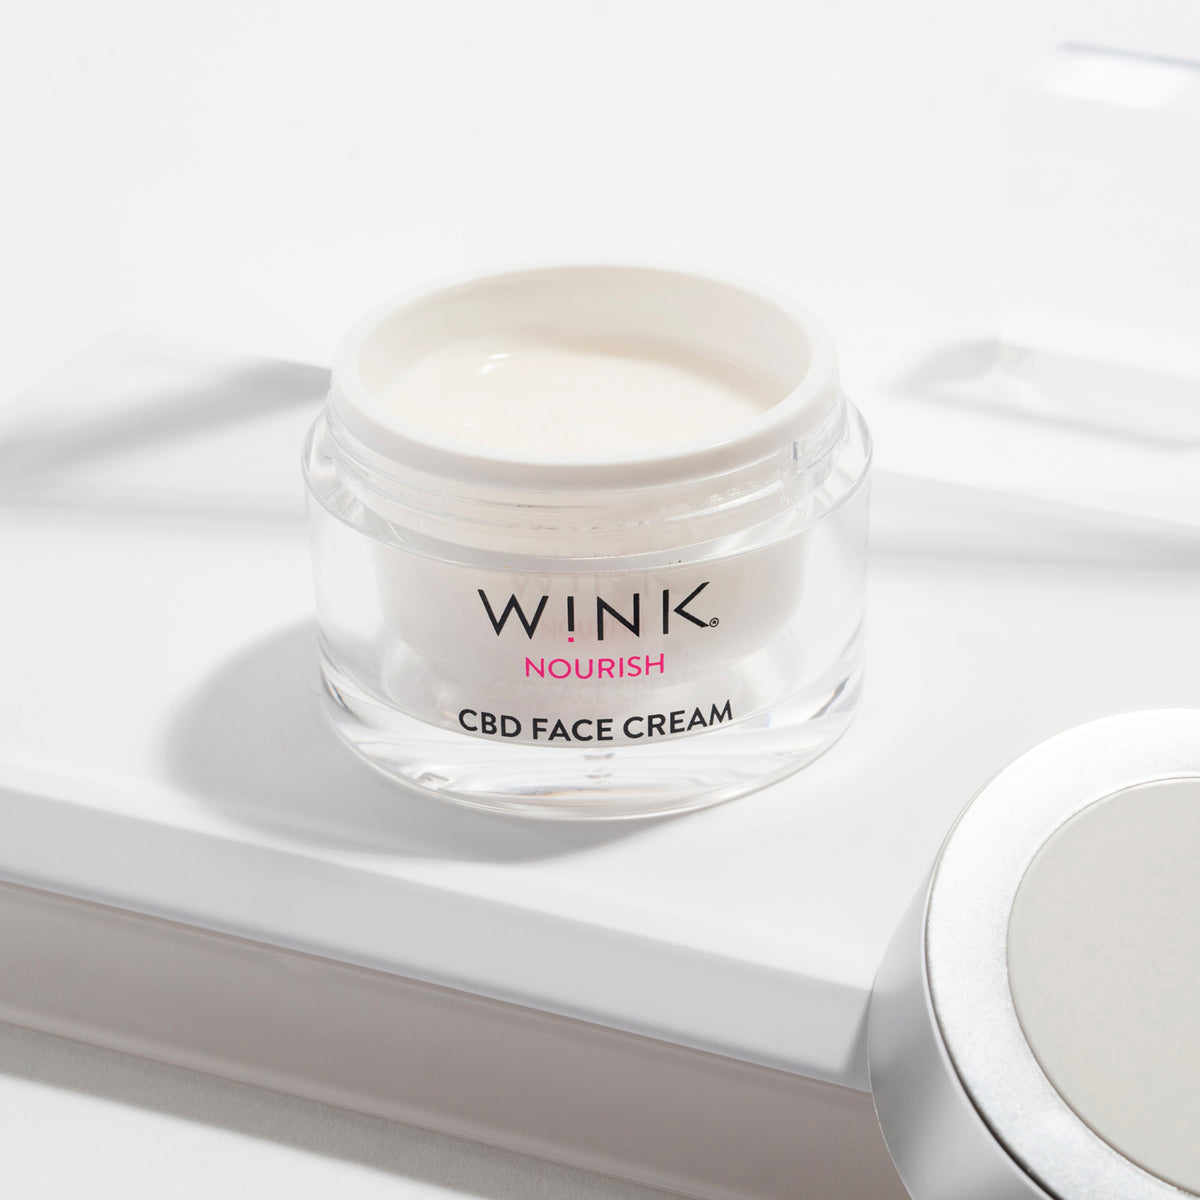 Reveal Your Radiance: Experience the Power of Nourishing CBD Face Cream